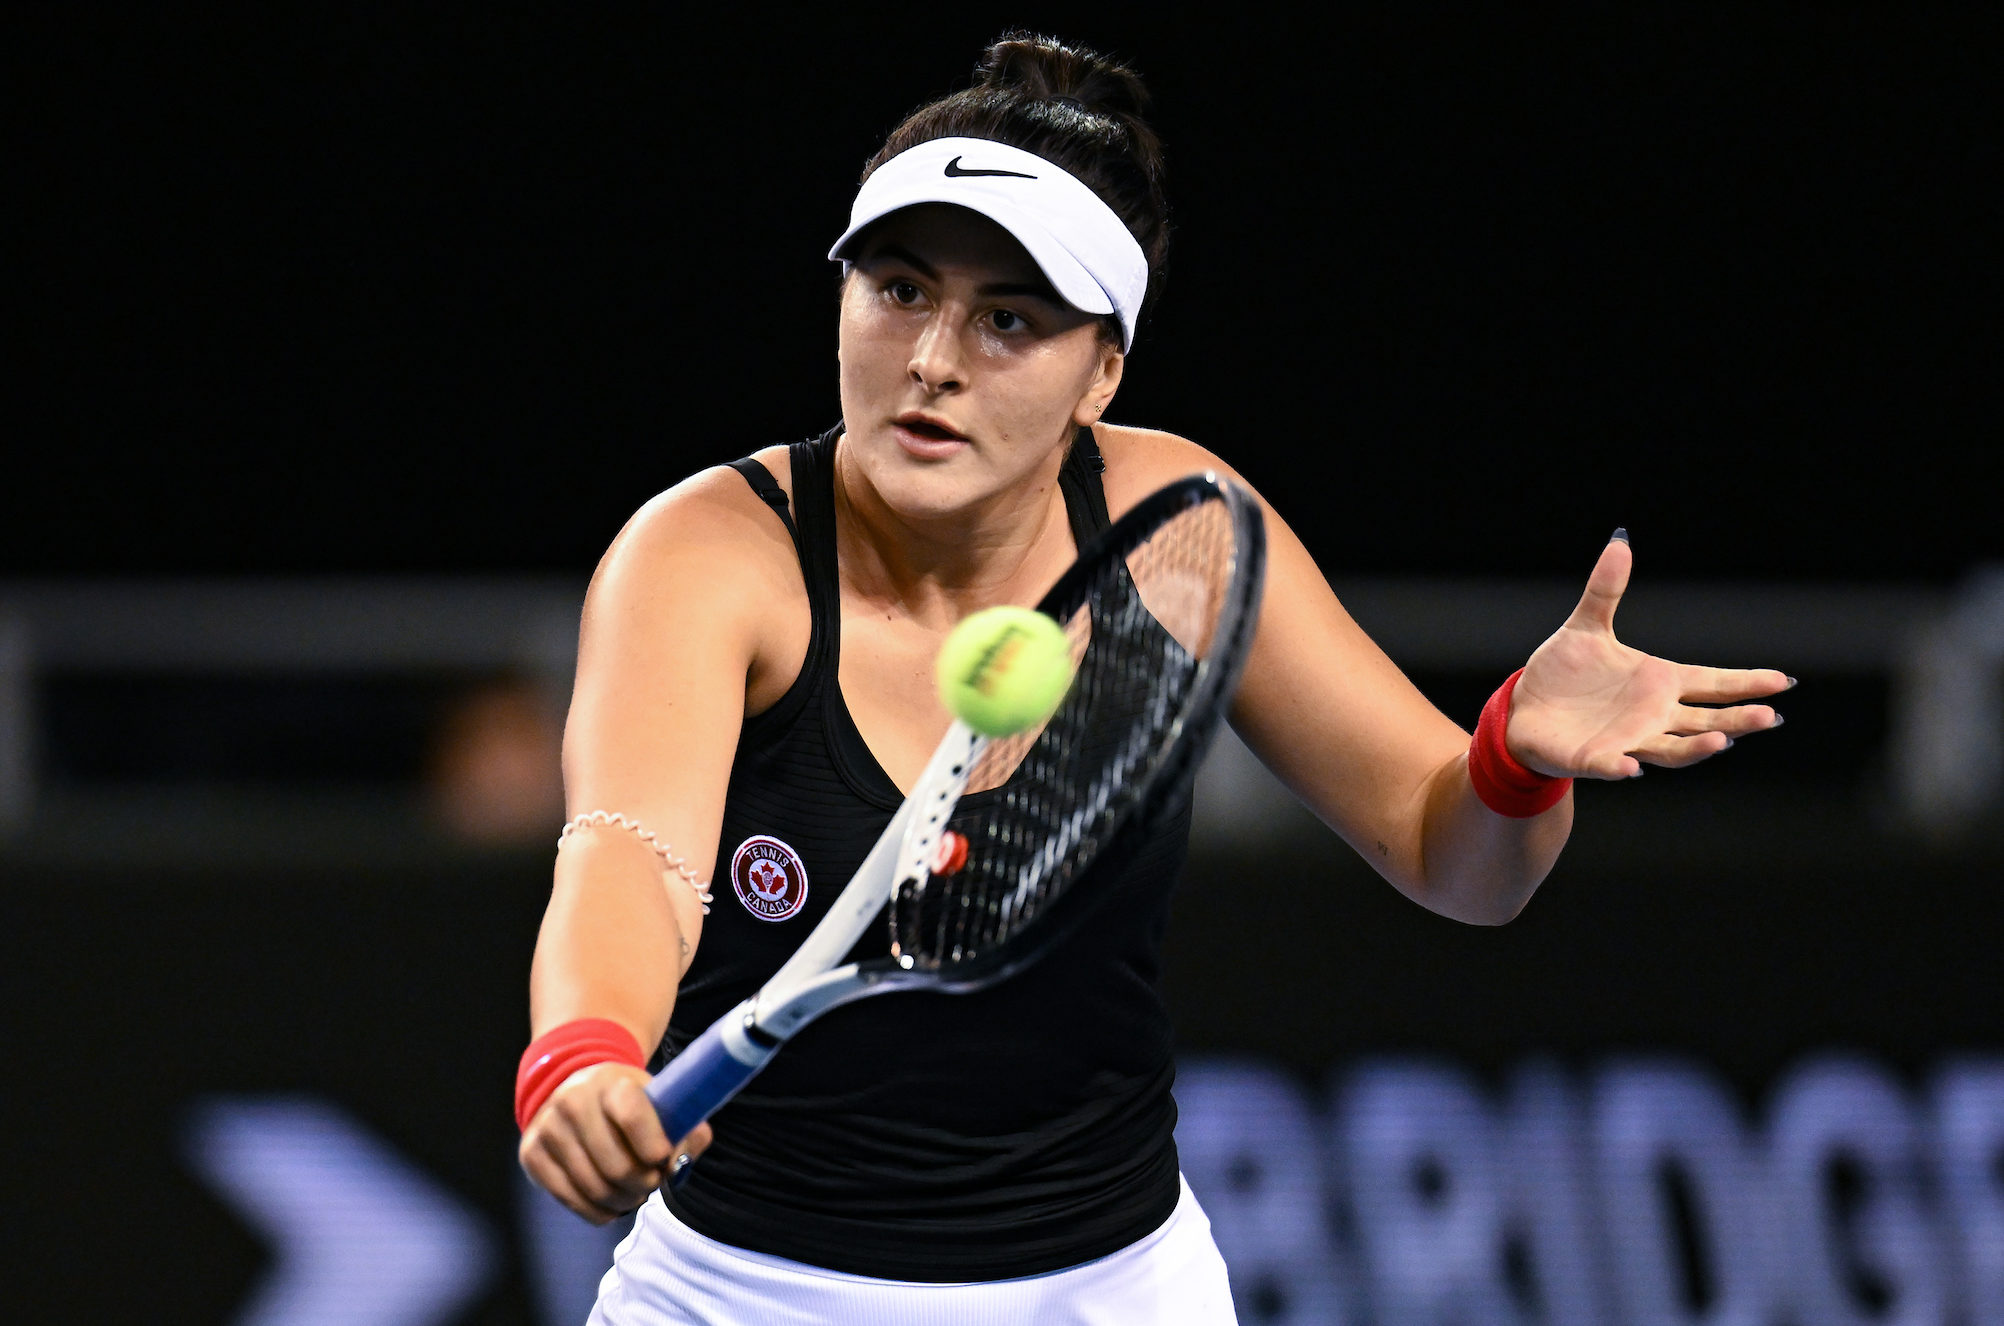 Andreescu Cant Hold Off Kudermetova in Adelaide Second Round